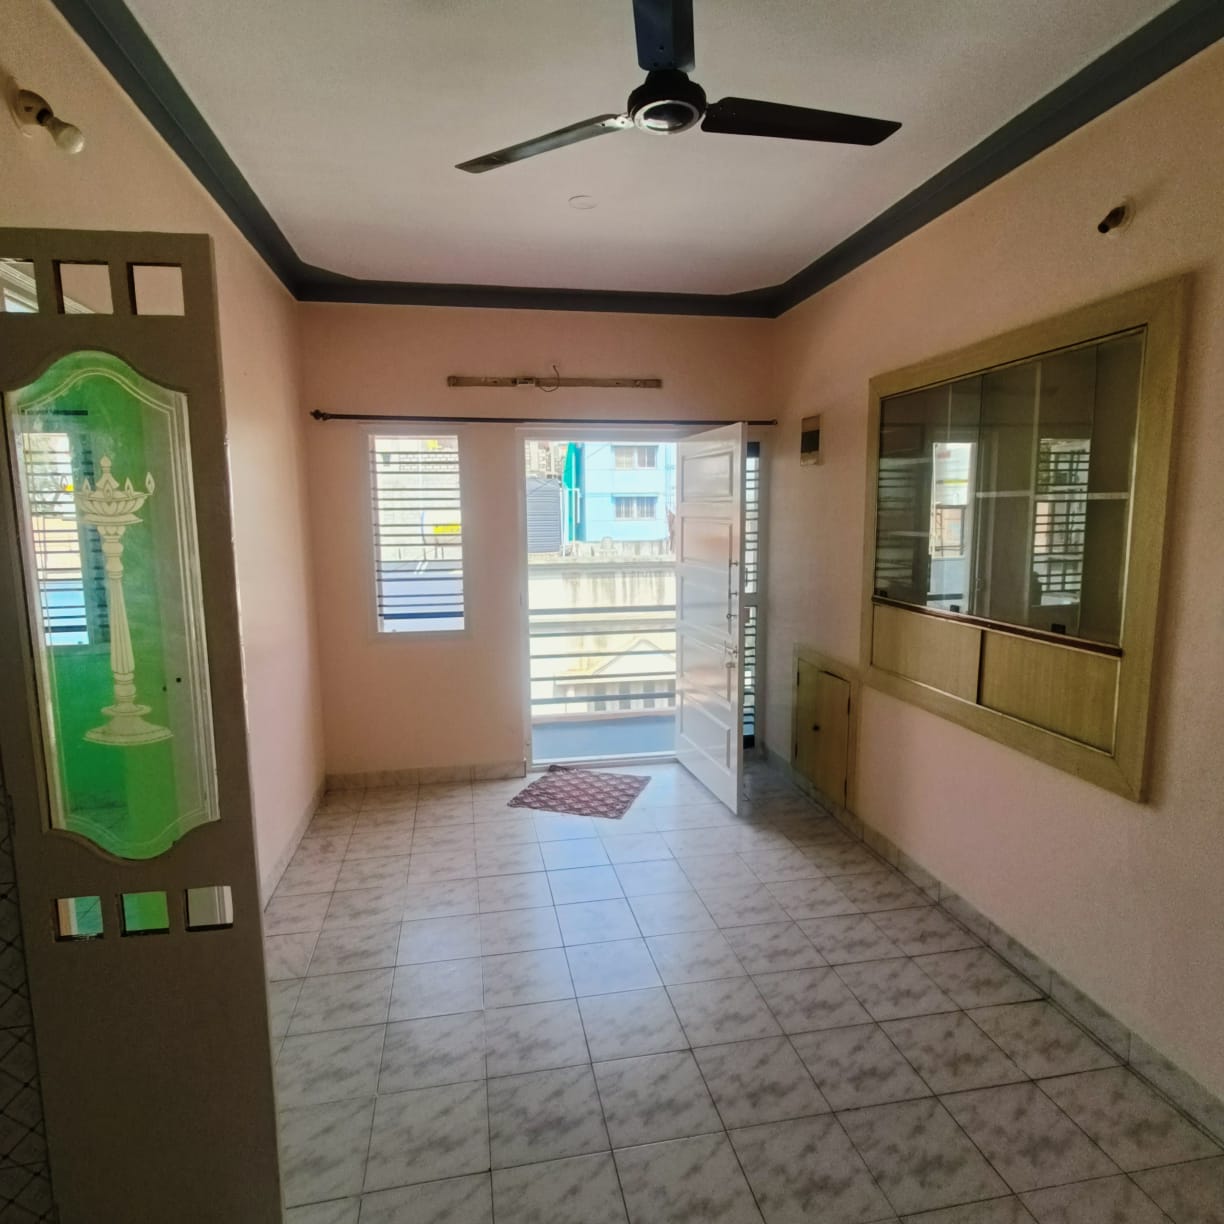 3 BHK Independent House for Lease Only at JAML2 - 4154 in JP Nagar Layouts